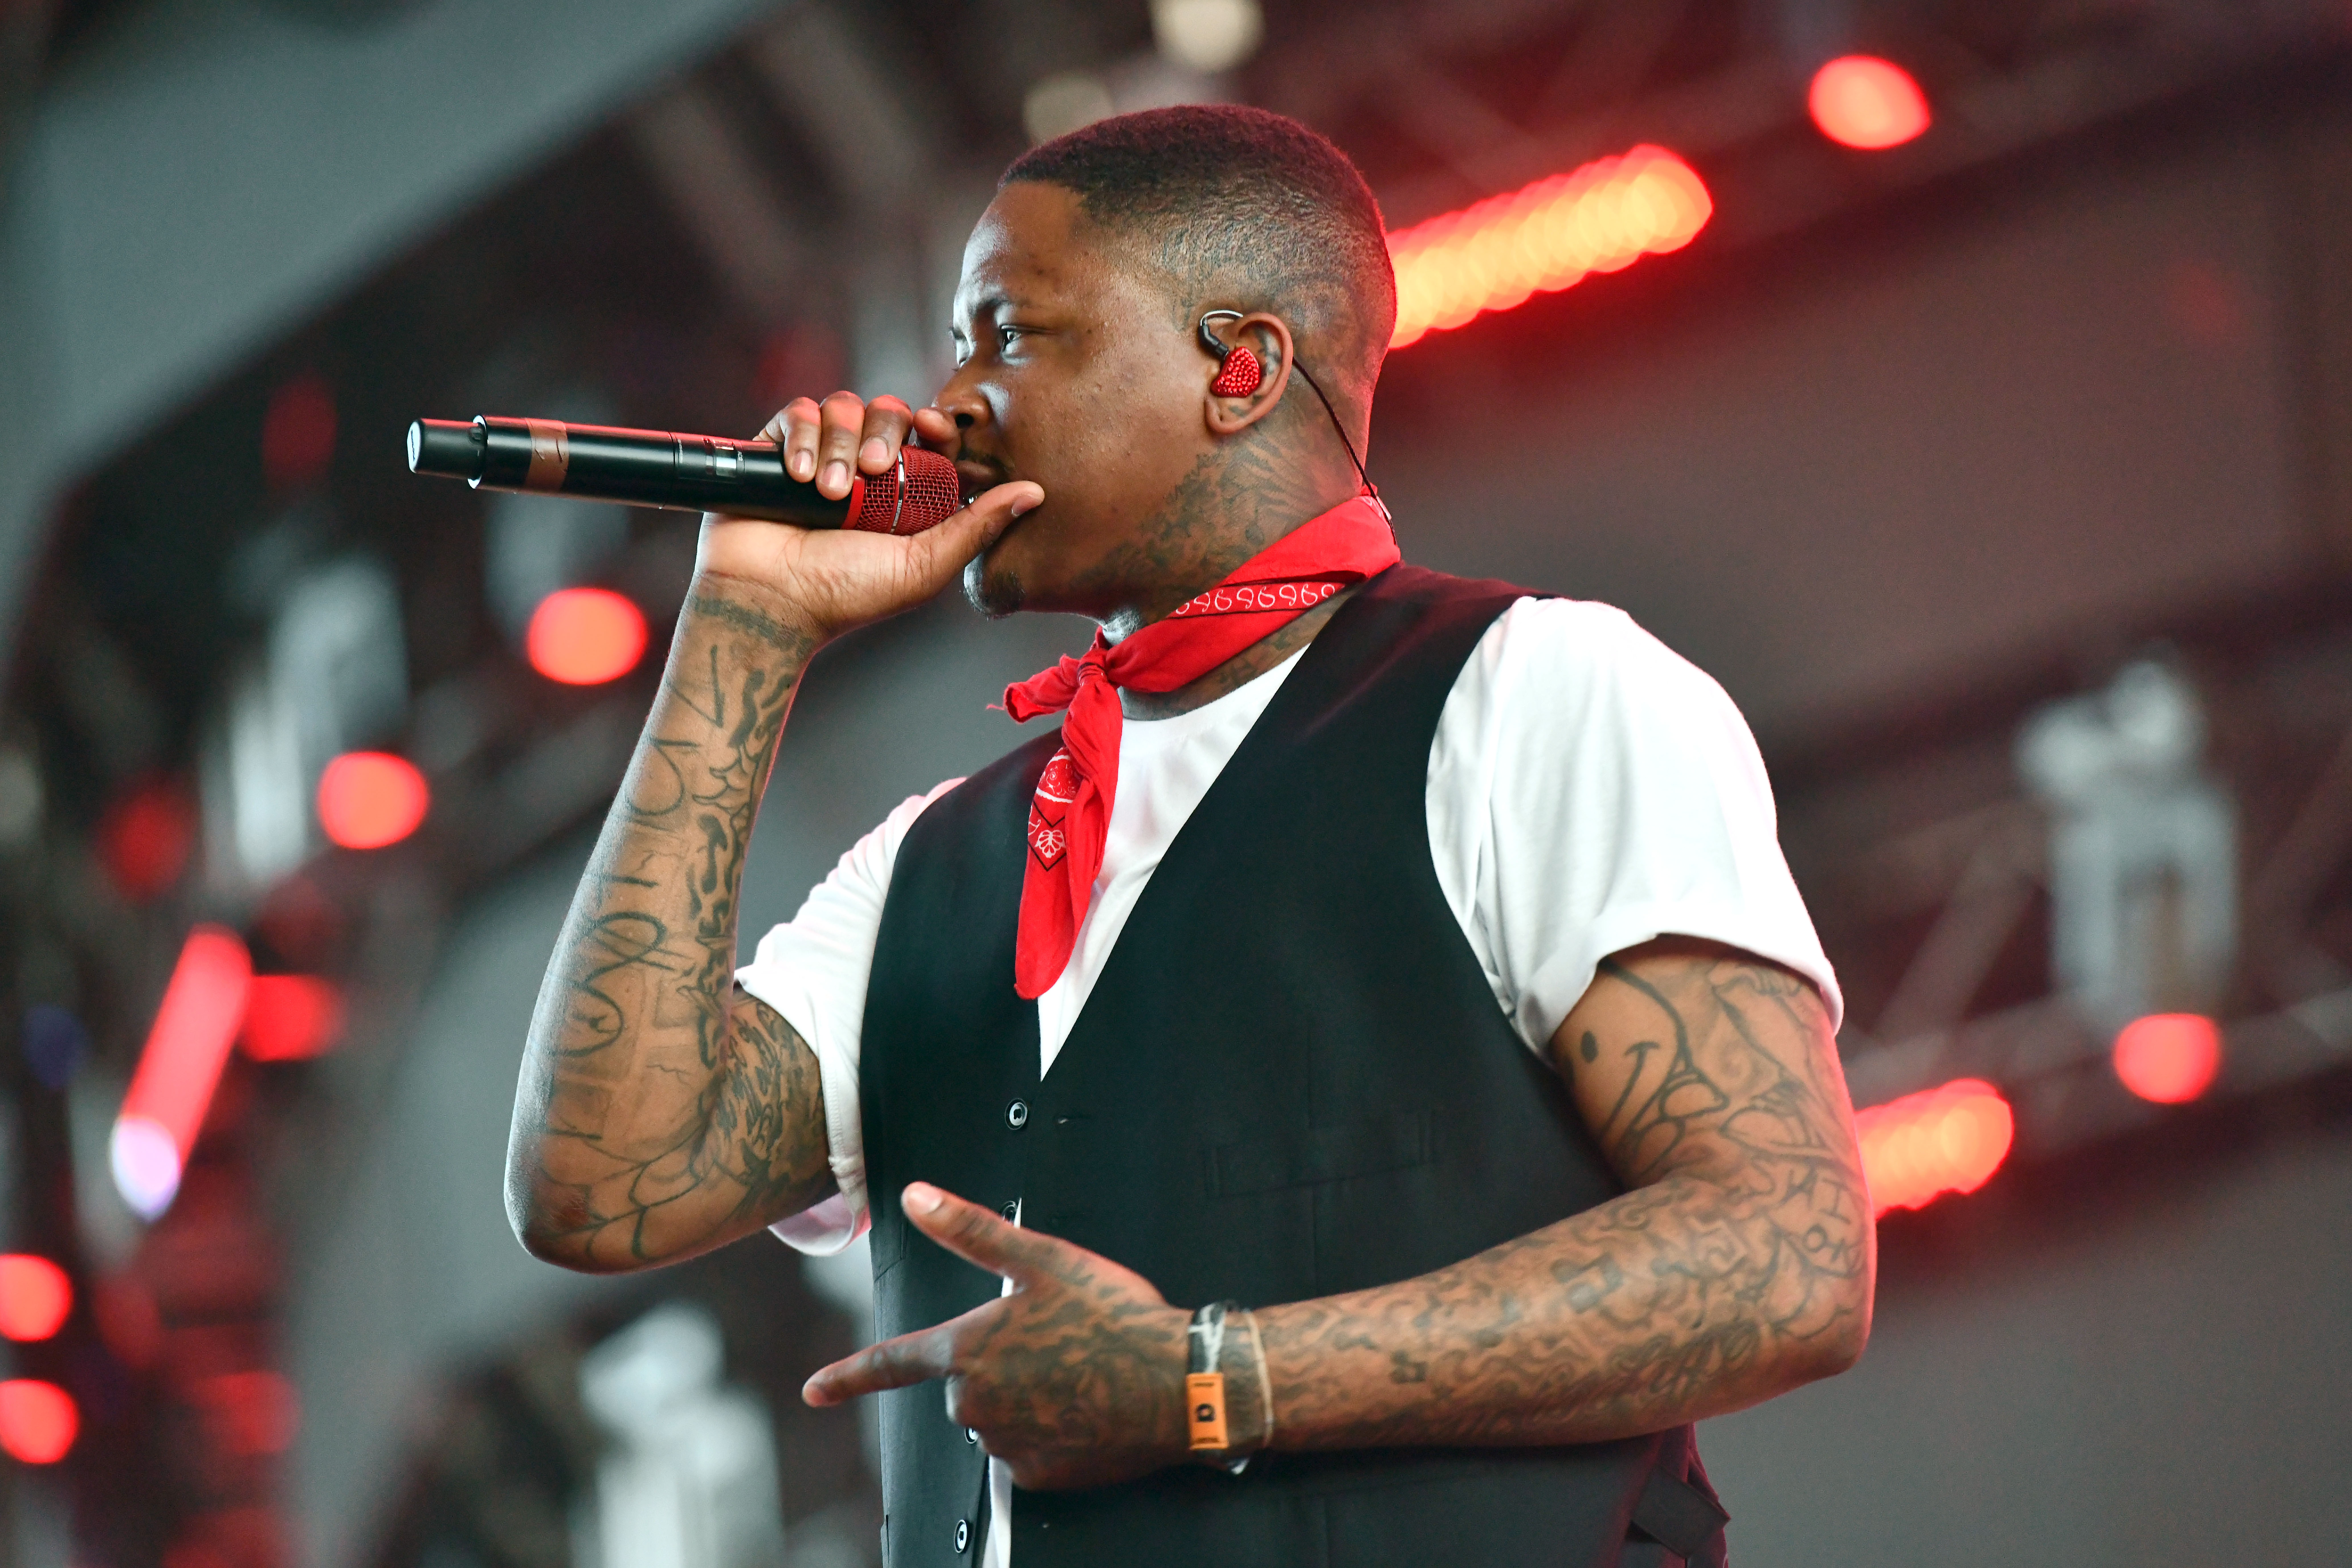 YG Reveals Title Of His Upcoming Album